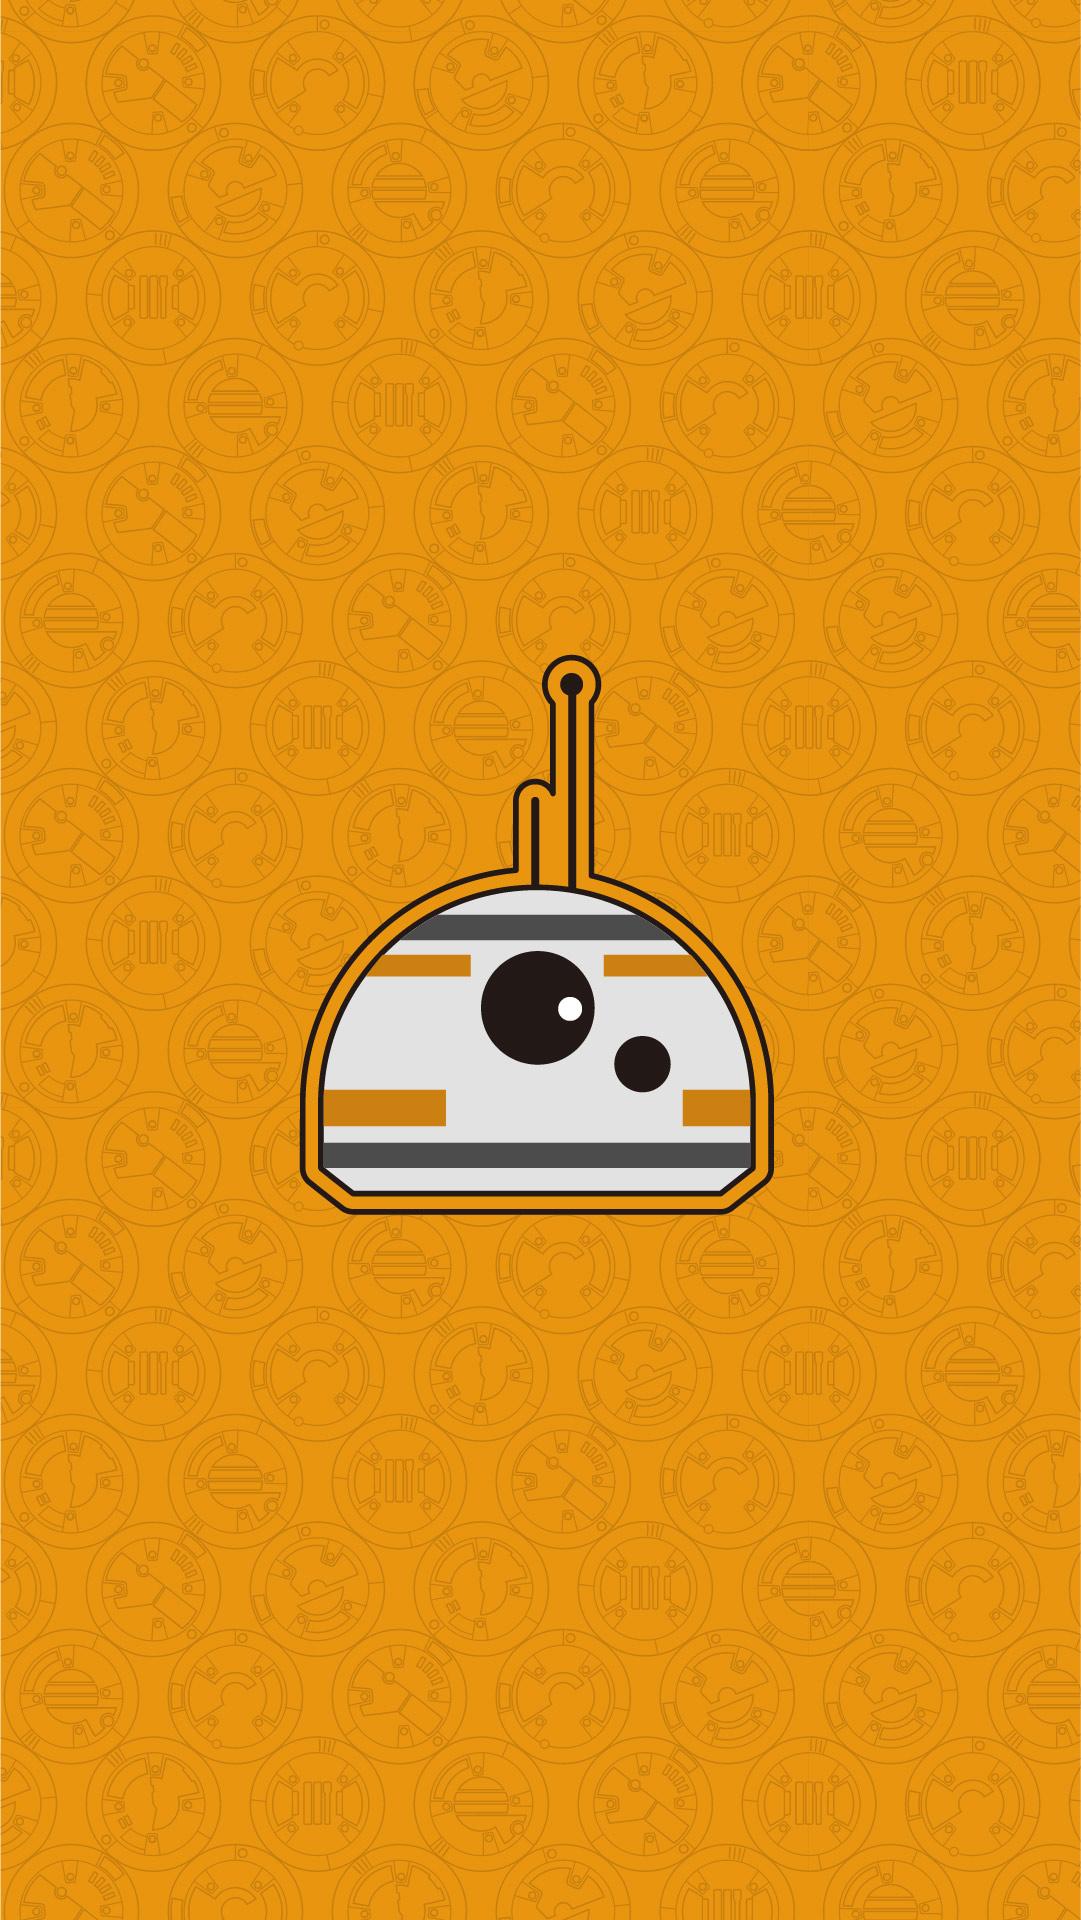 Star Wars Wallpaper For Mobile Devices